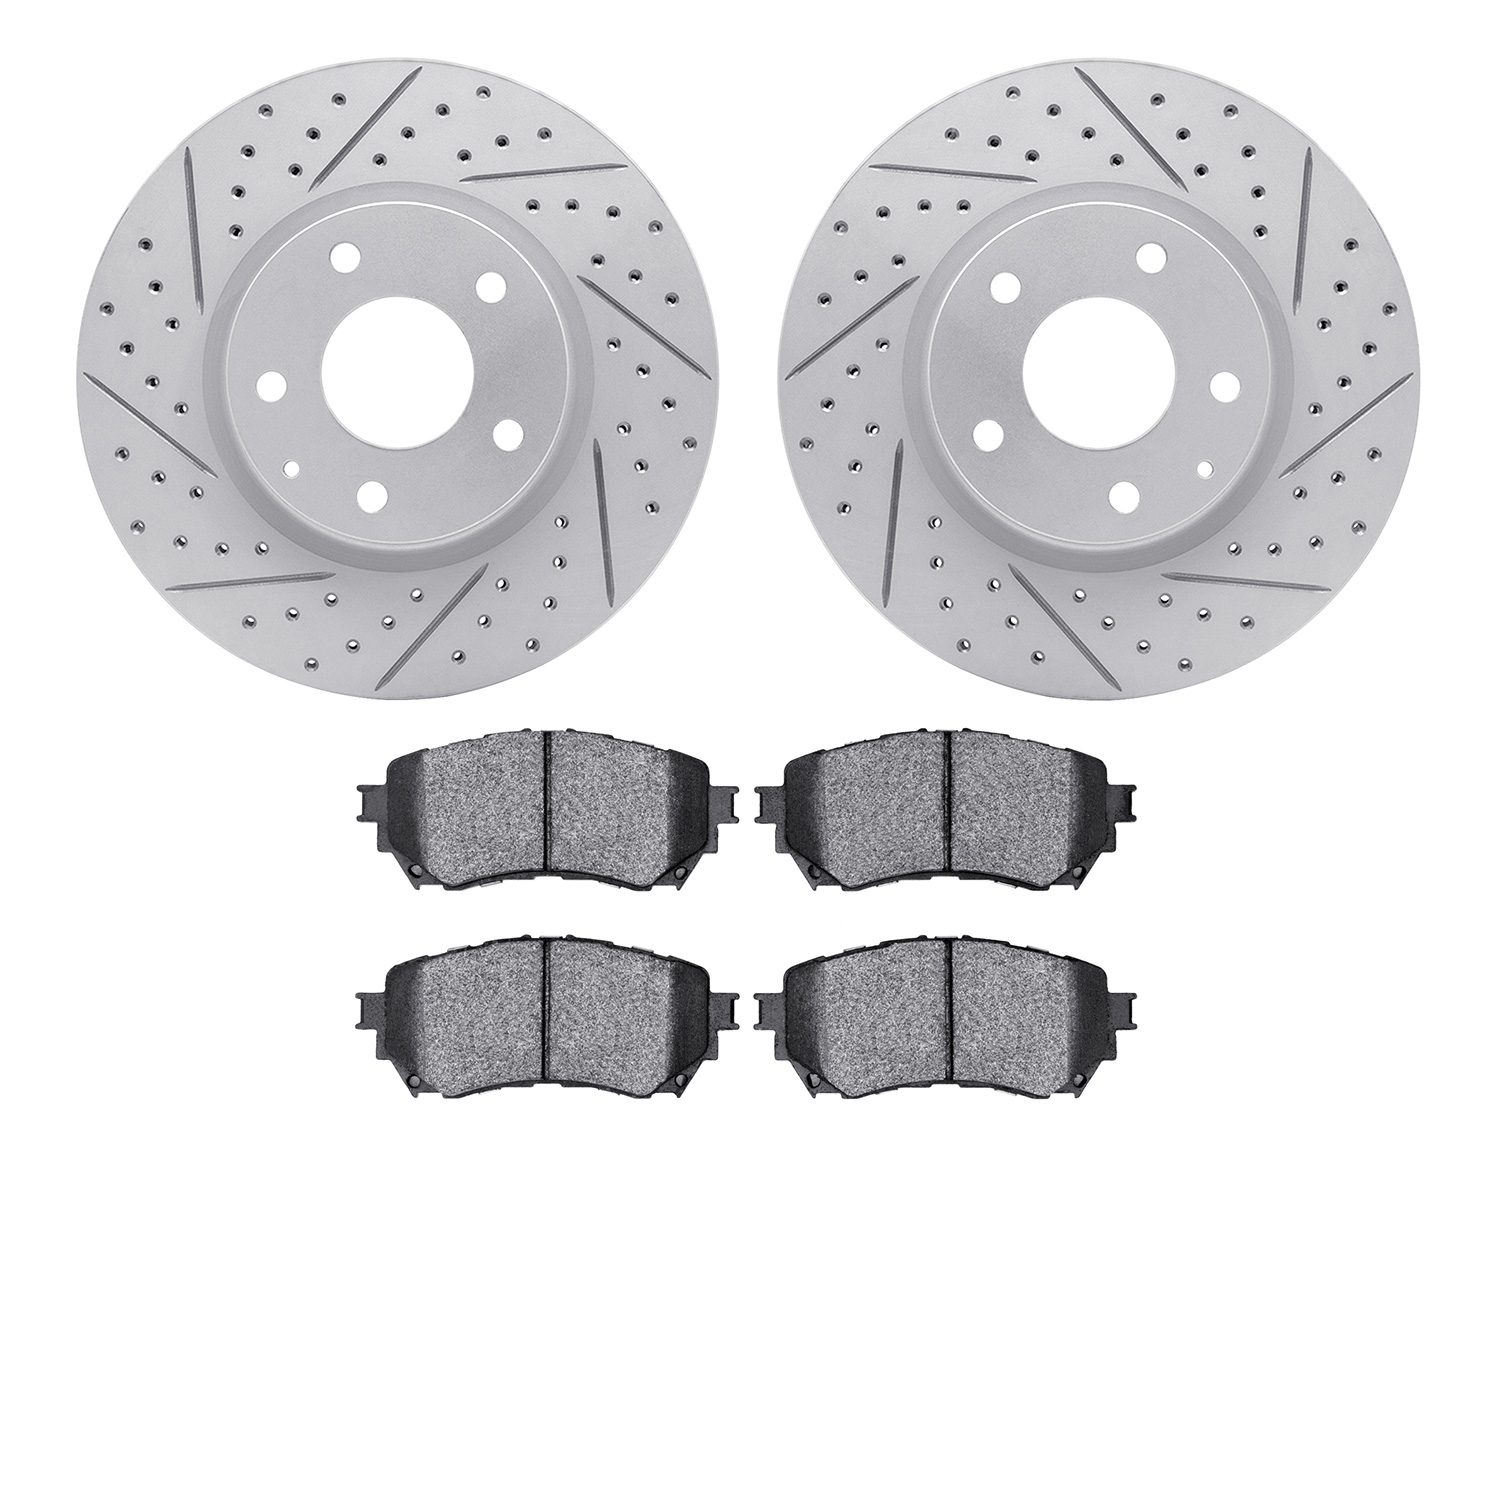 2502-80042 Geoperformance Drilled/Slotted Rotors w/5000 Advanced Brake Pads Kit, 2014-2015 Ford/Lincoln/Mercury/Mazda, Position: